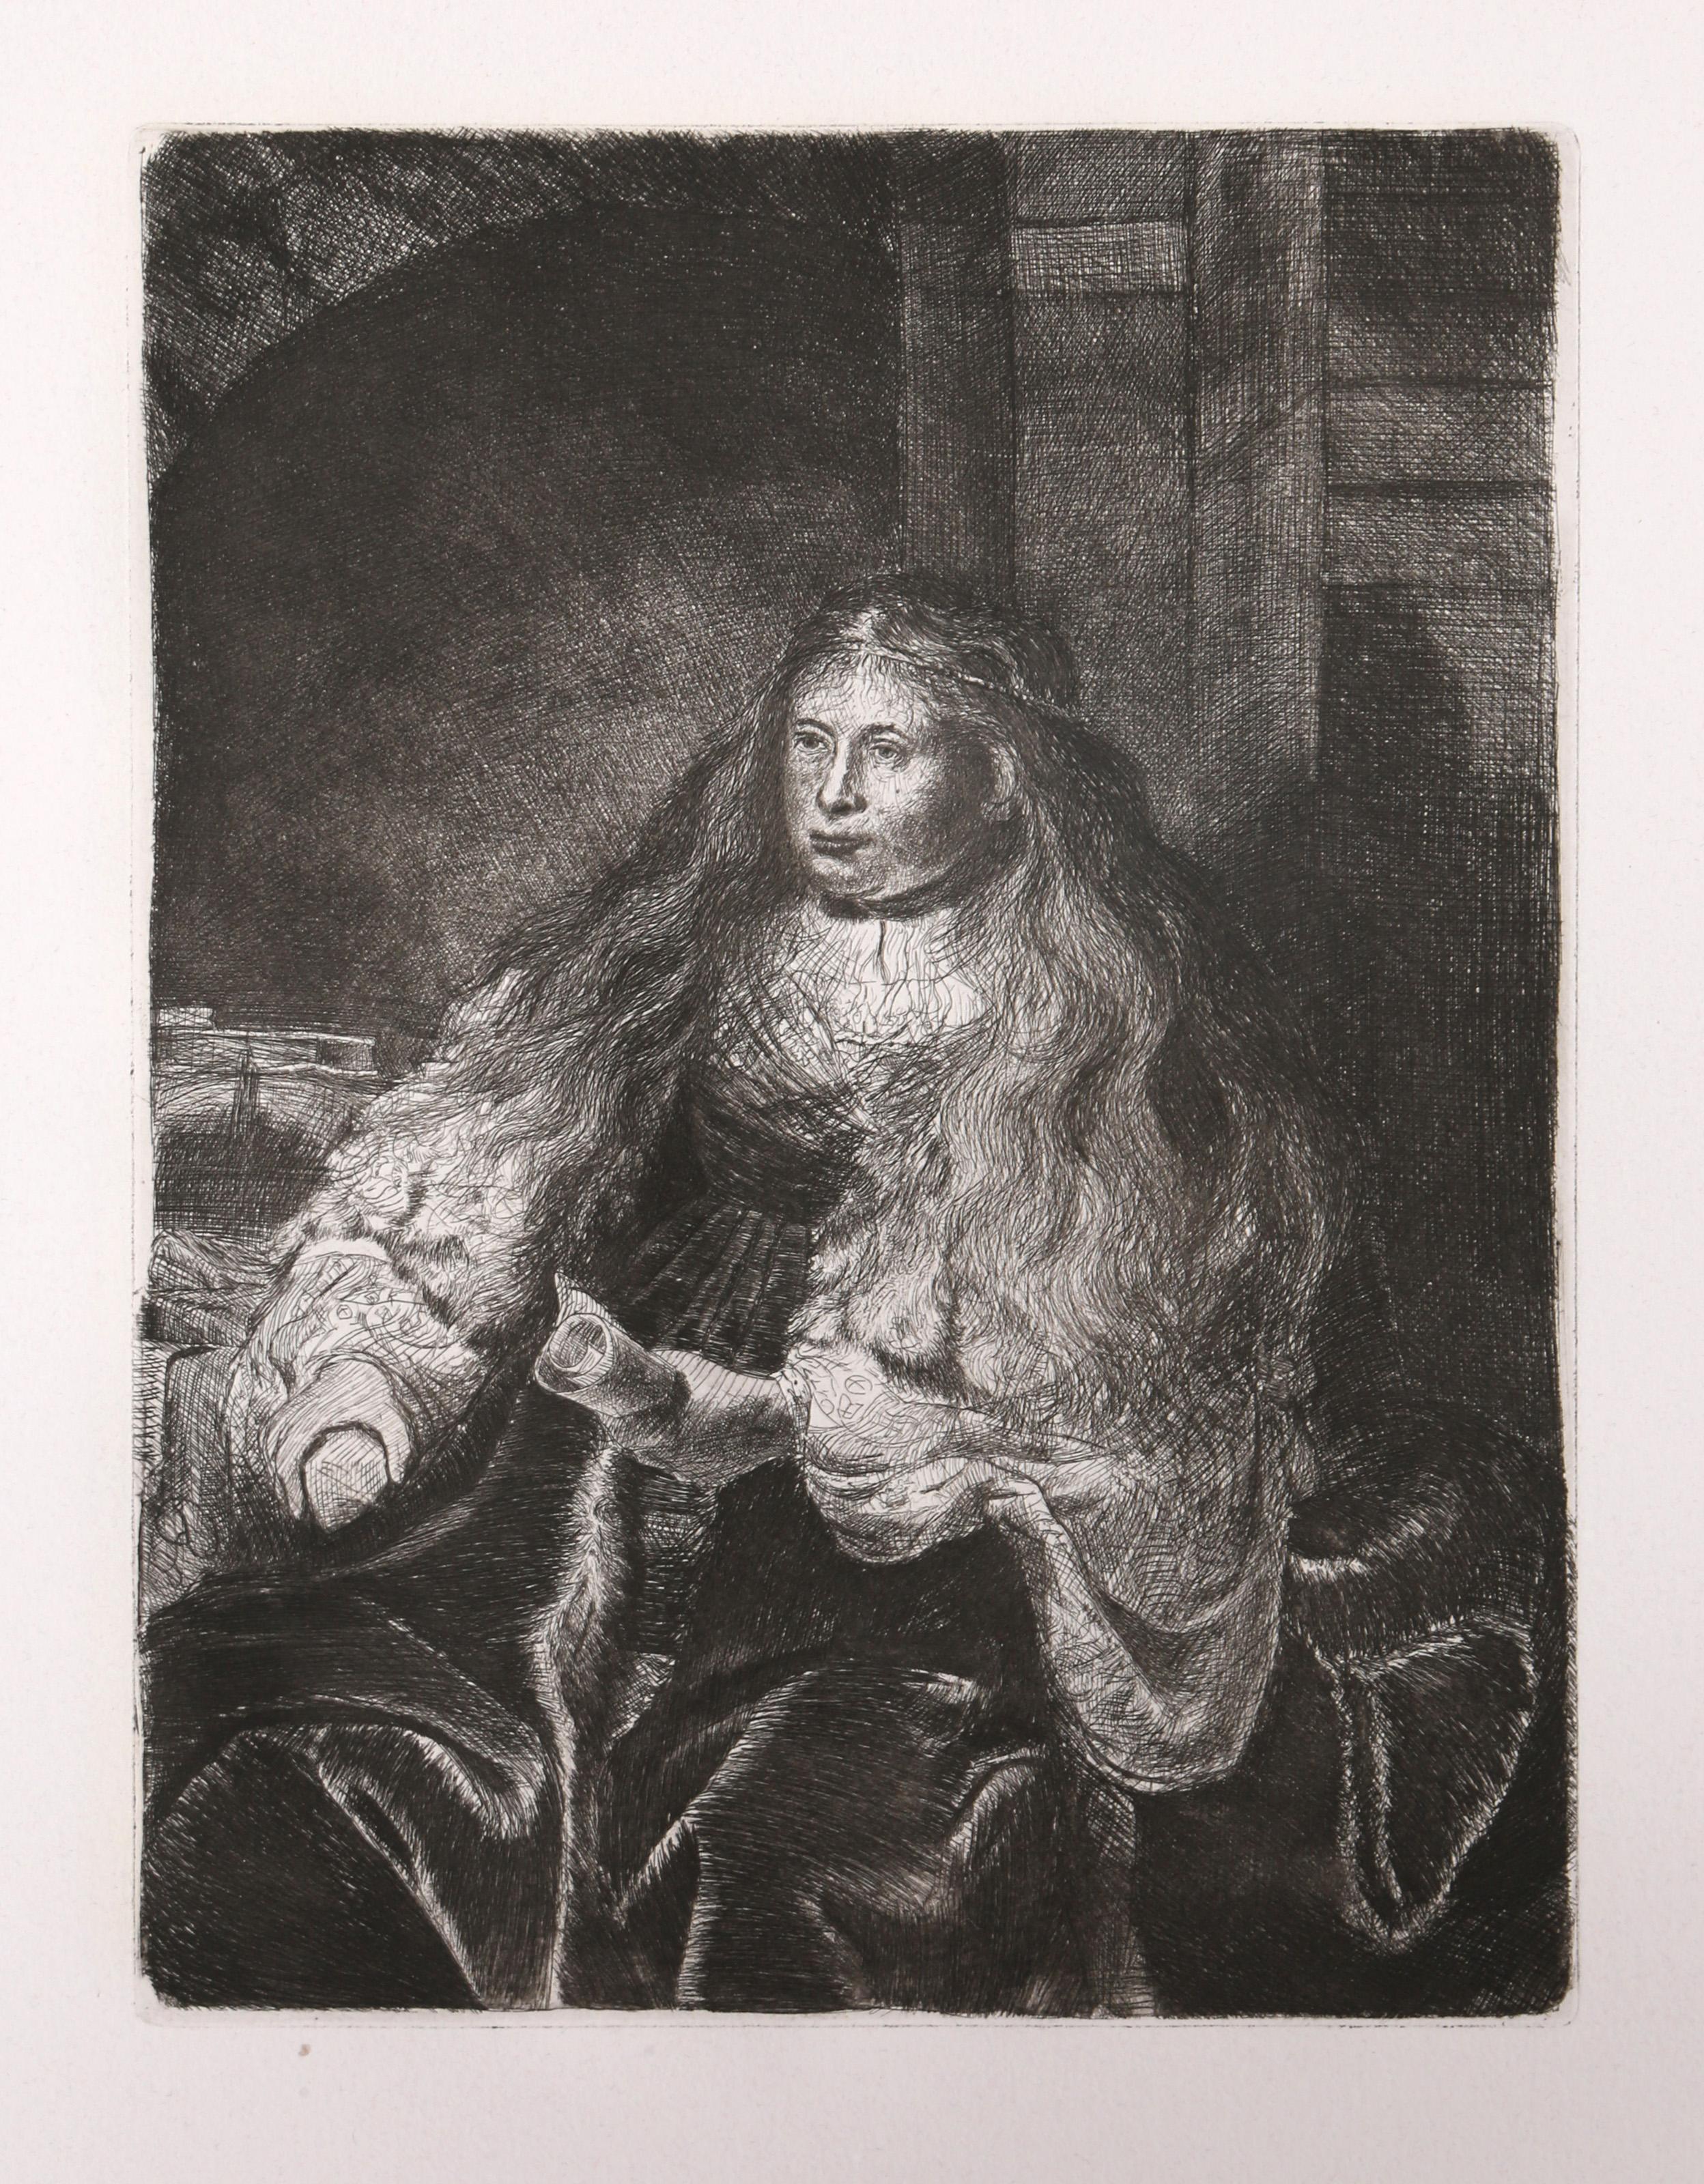 Artist: Rembrandt van Rijn, After by Amand Durand, Dutch (1606 - 1669) -  The Great Jewish Bride (B340), Year: of original 1635, Medium: Etching on Laid Paper, Image Size: 12 x 9 inches, Size: 26  x 20 in. (66.04  x 50.8 cm), Printer: Amand Durand,